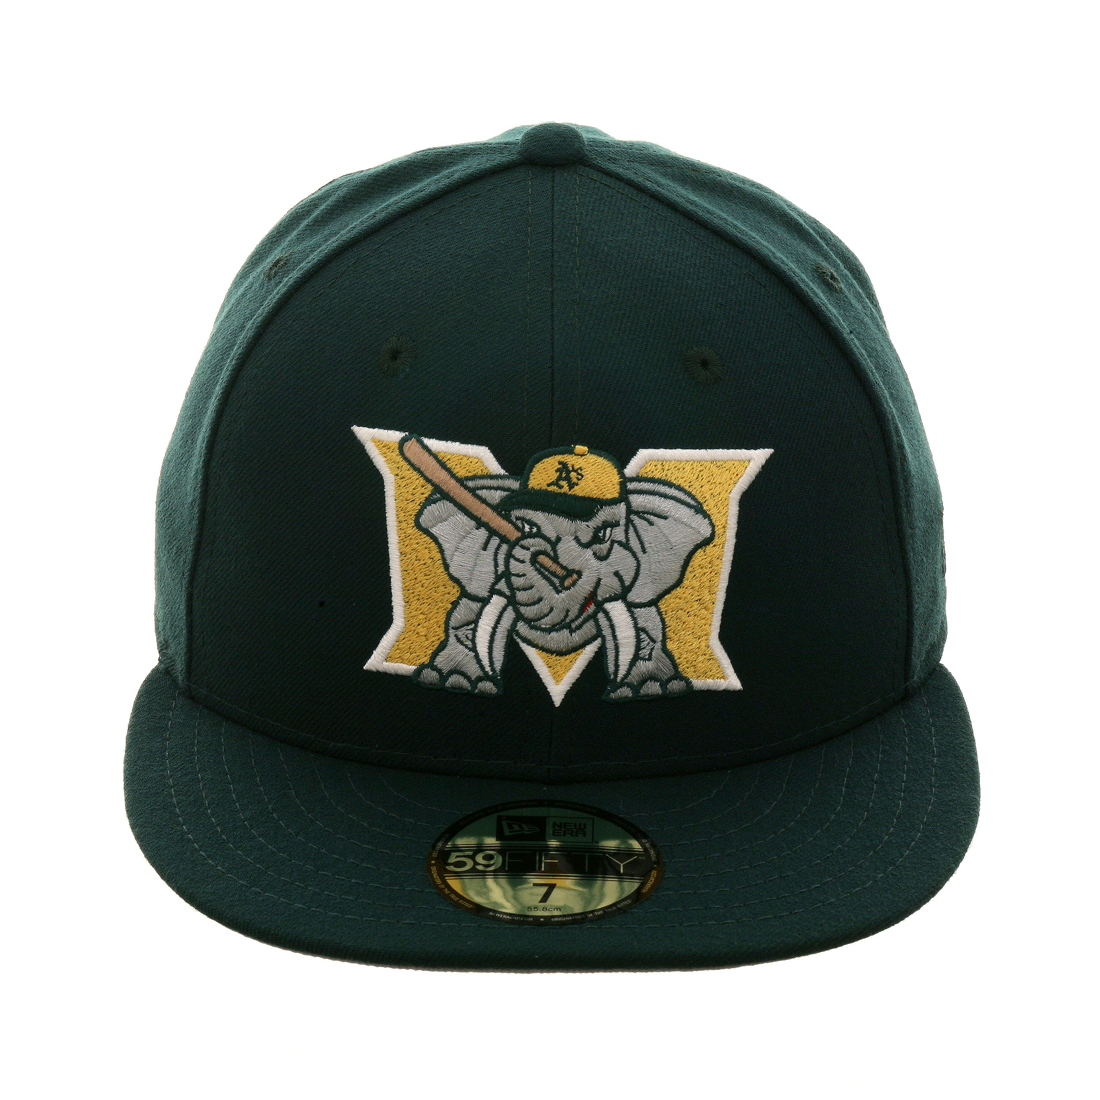 Hat Club - Minor League Hockey 5950s going online Tuesday